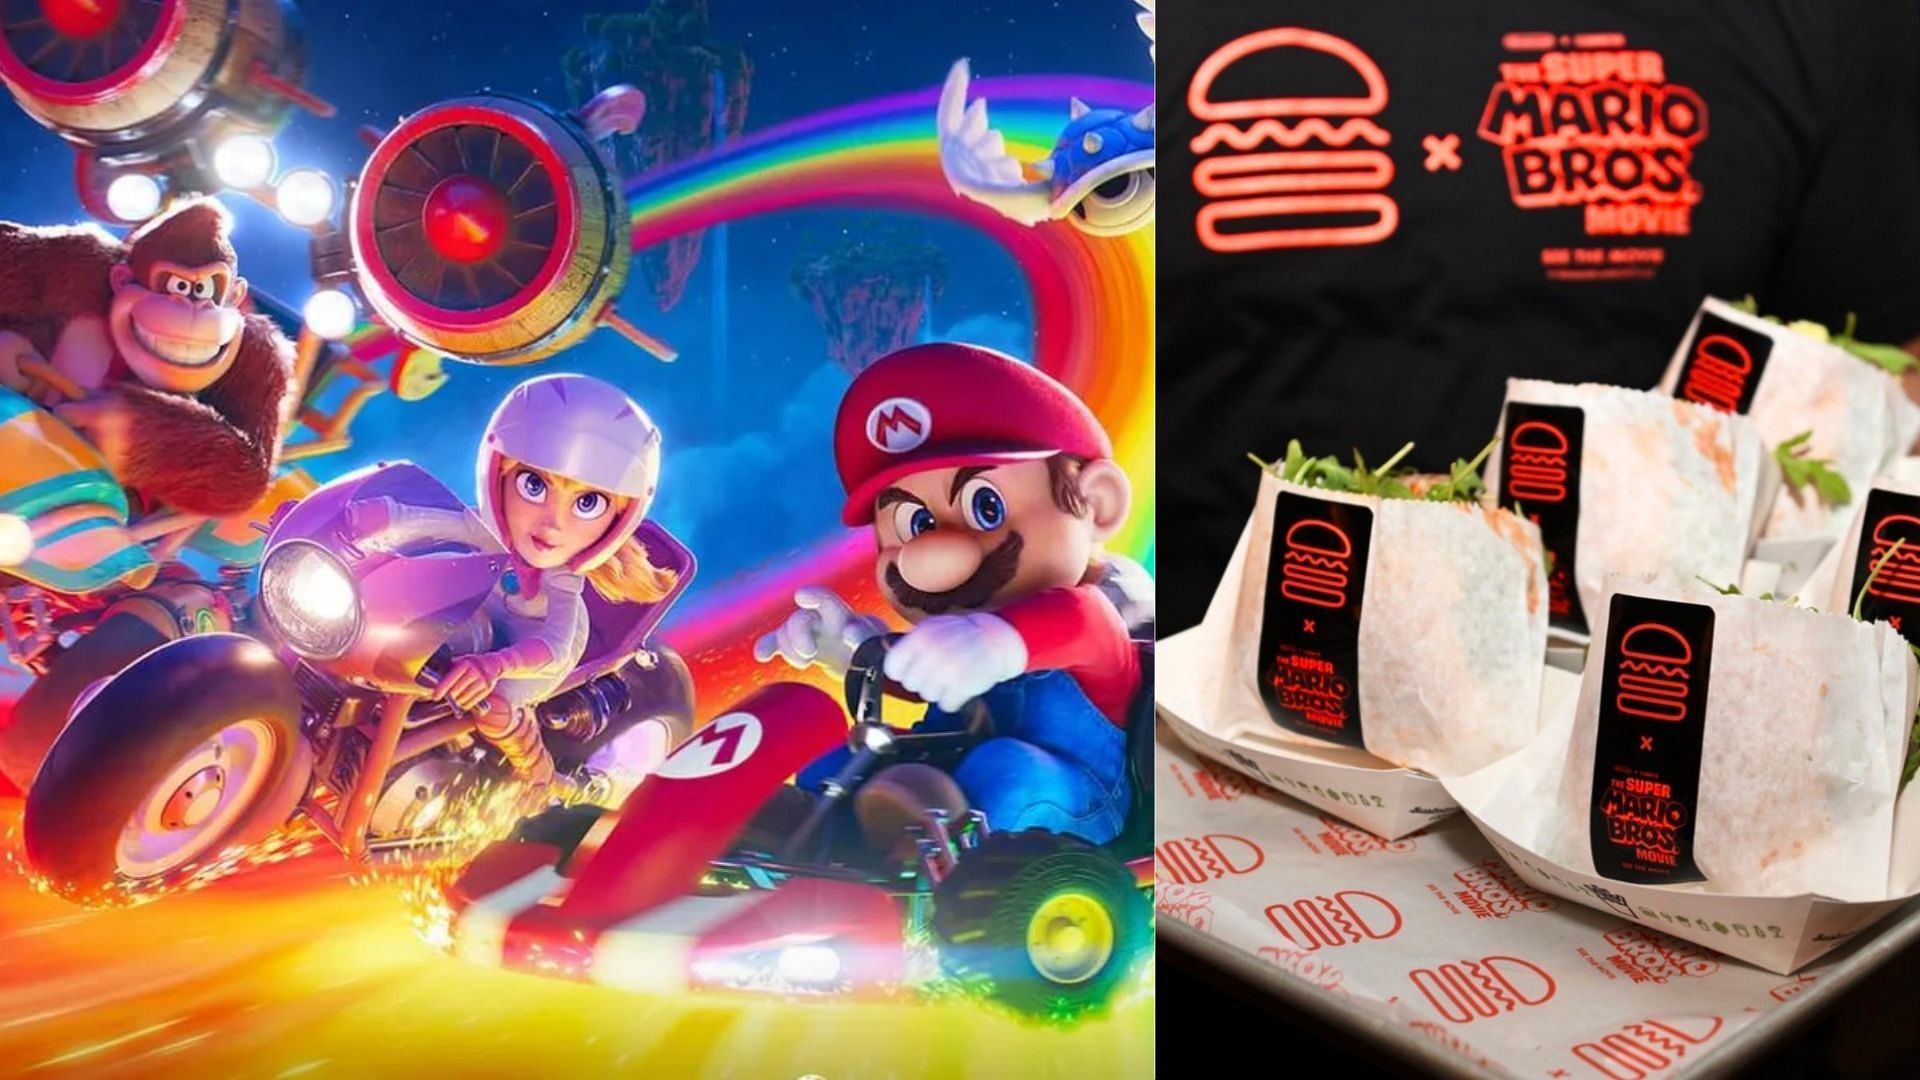 the super exclusive Super Mario Bros menu items will be available at the chain&#039;s DUMBO location between March 31 and April 2 (Image via Shake Shack/Nintendo)